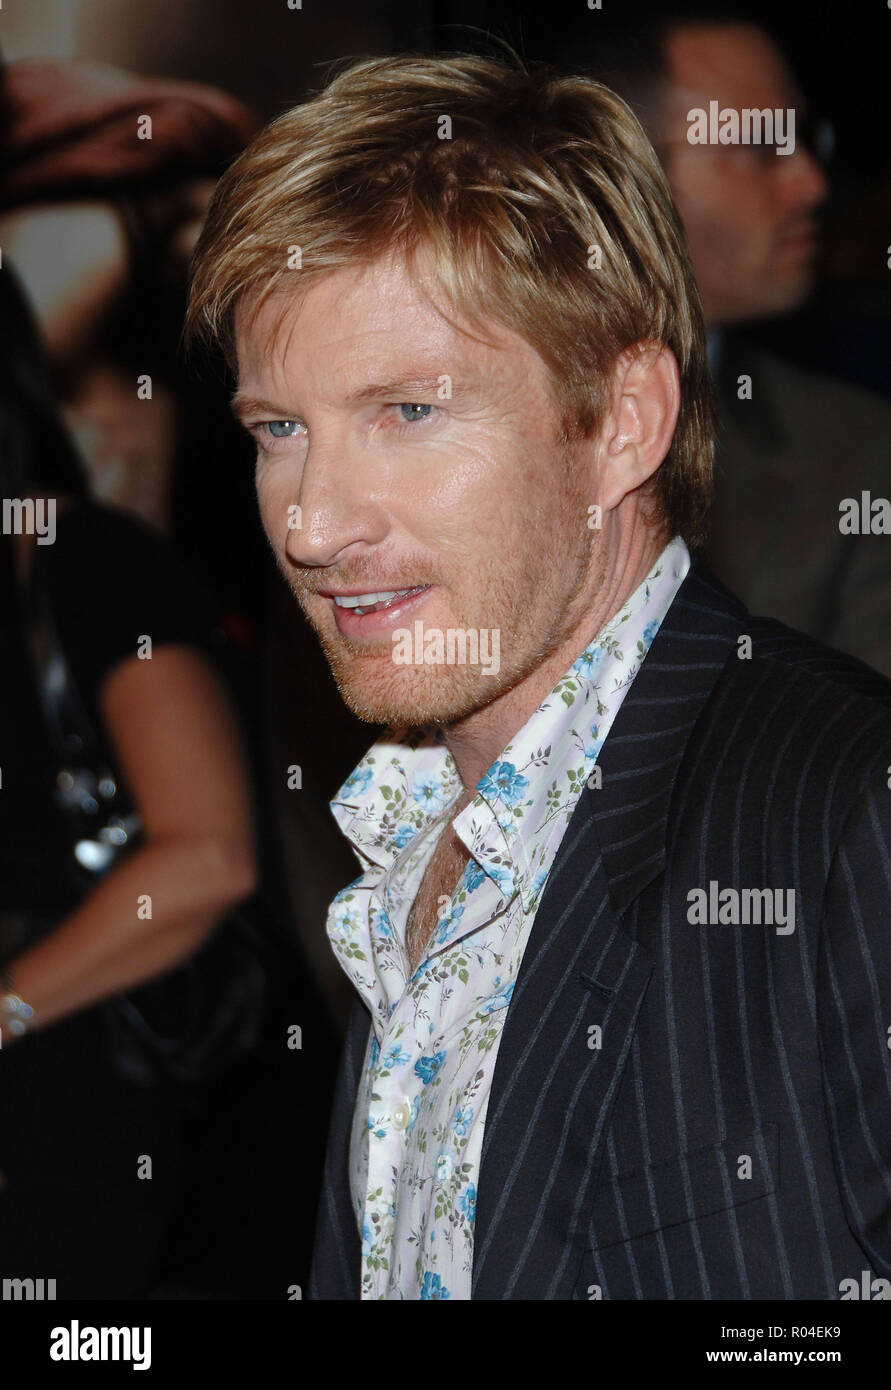 David Wenham arriving at the 300 Premiere at the Chinese Theatre in Los Angeles.  headshot smileWenhamDavid057 Red Carpet Event, Vertical, USA, Film Industry, Celebrities,  Photography, Bestof, Arts Culture and Entertainment, Topix Celebrities fashion /  Vertical, Best of, Event in Hollywood Life - California,  Red Carpet and backstage, USA, Film Industry, Celebrities,  movie celebrities, TV celebrities, Music celebrities, Photography, Bestof, Arts Culture and Entertainment,  Topix, headshot, vertical, one person,, from the year , 2007, inquiry tsuni@Gamma-USA.com Stock Photo